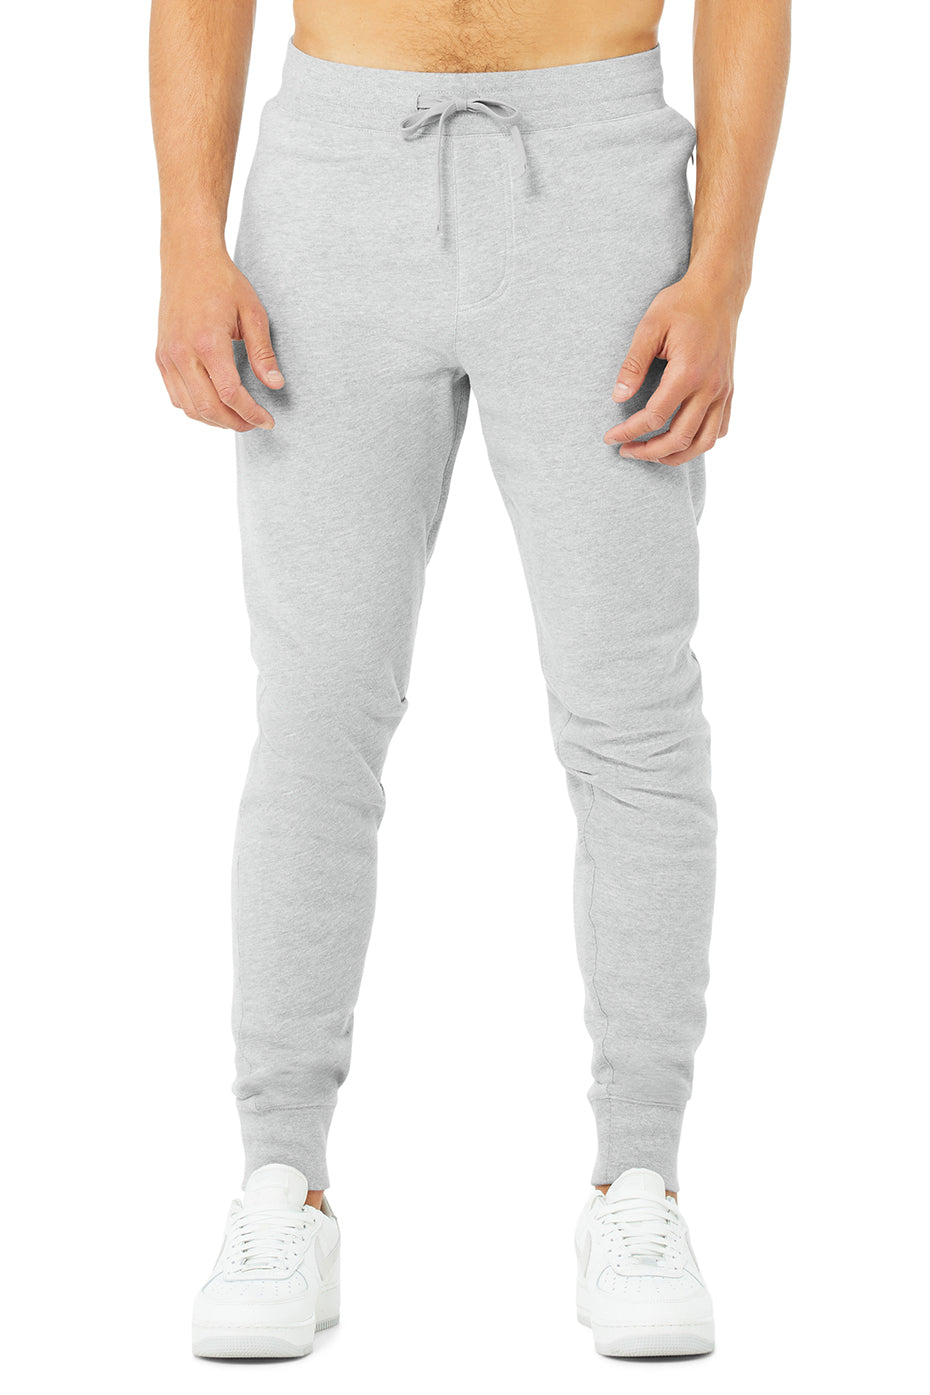 Accolade Sweatpant in Cranberry by Alo Yoga - International Design